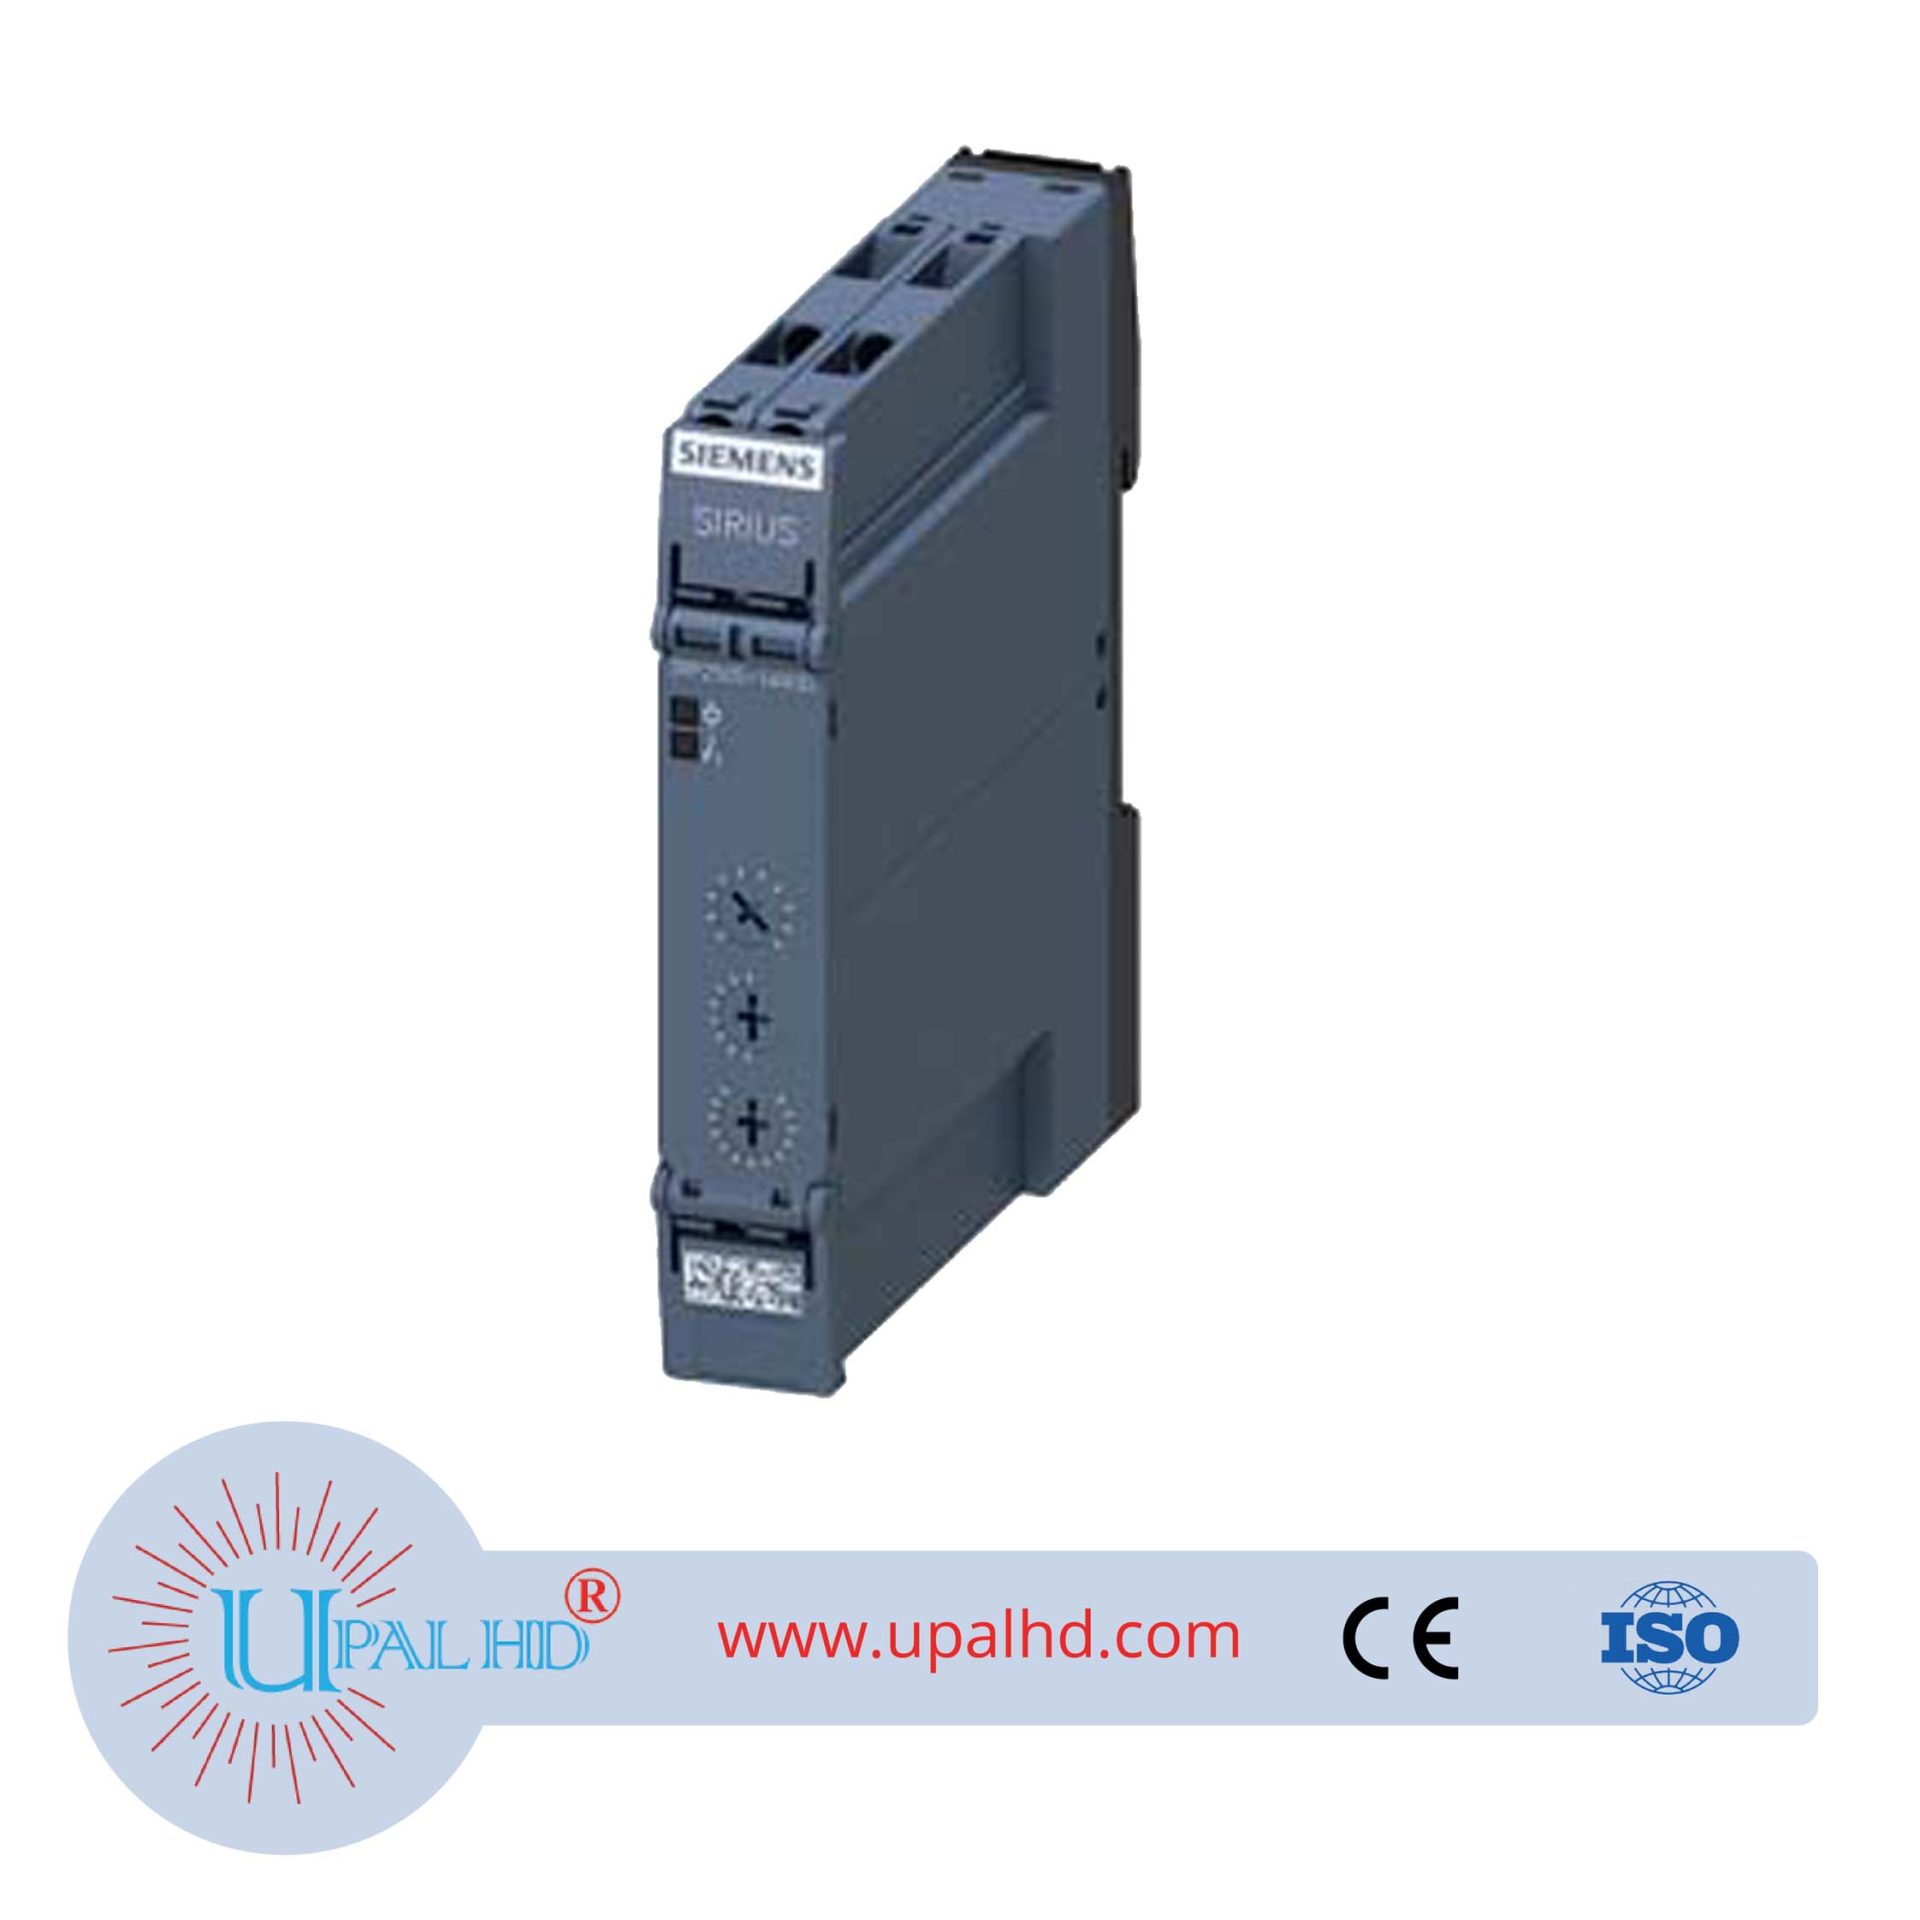 Futures – Time Relay, Return Delay, 7 Time Ranges 0.05-600s, 24V AC/DC, 2 exchange contacts